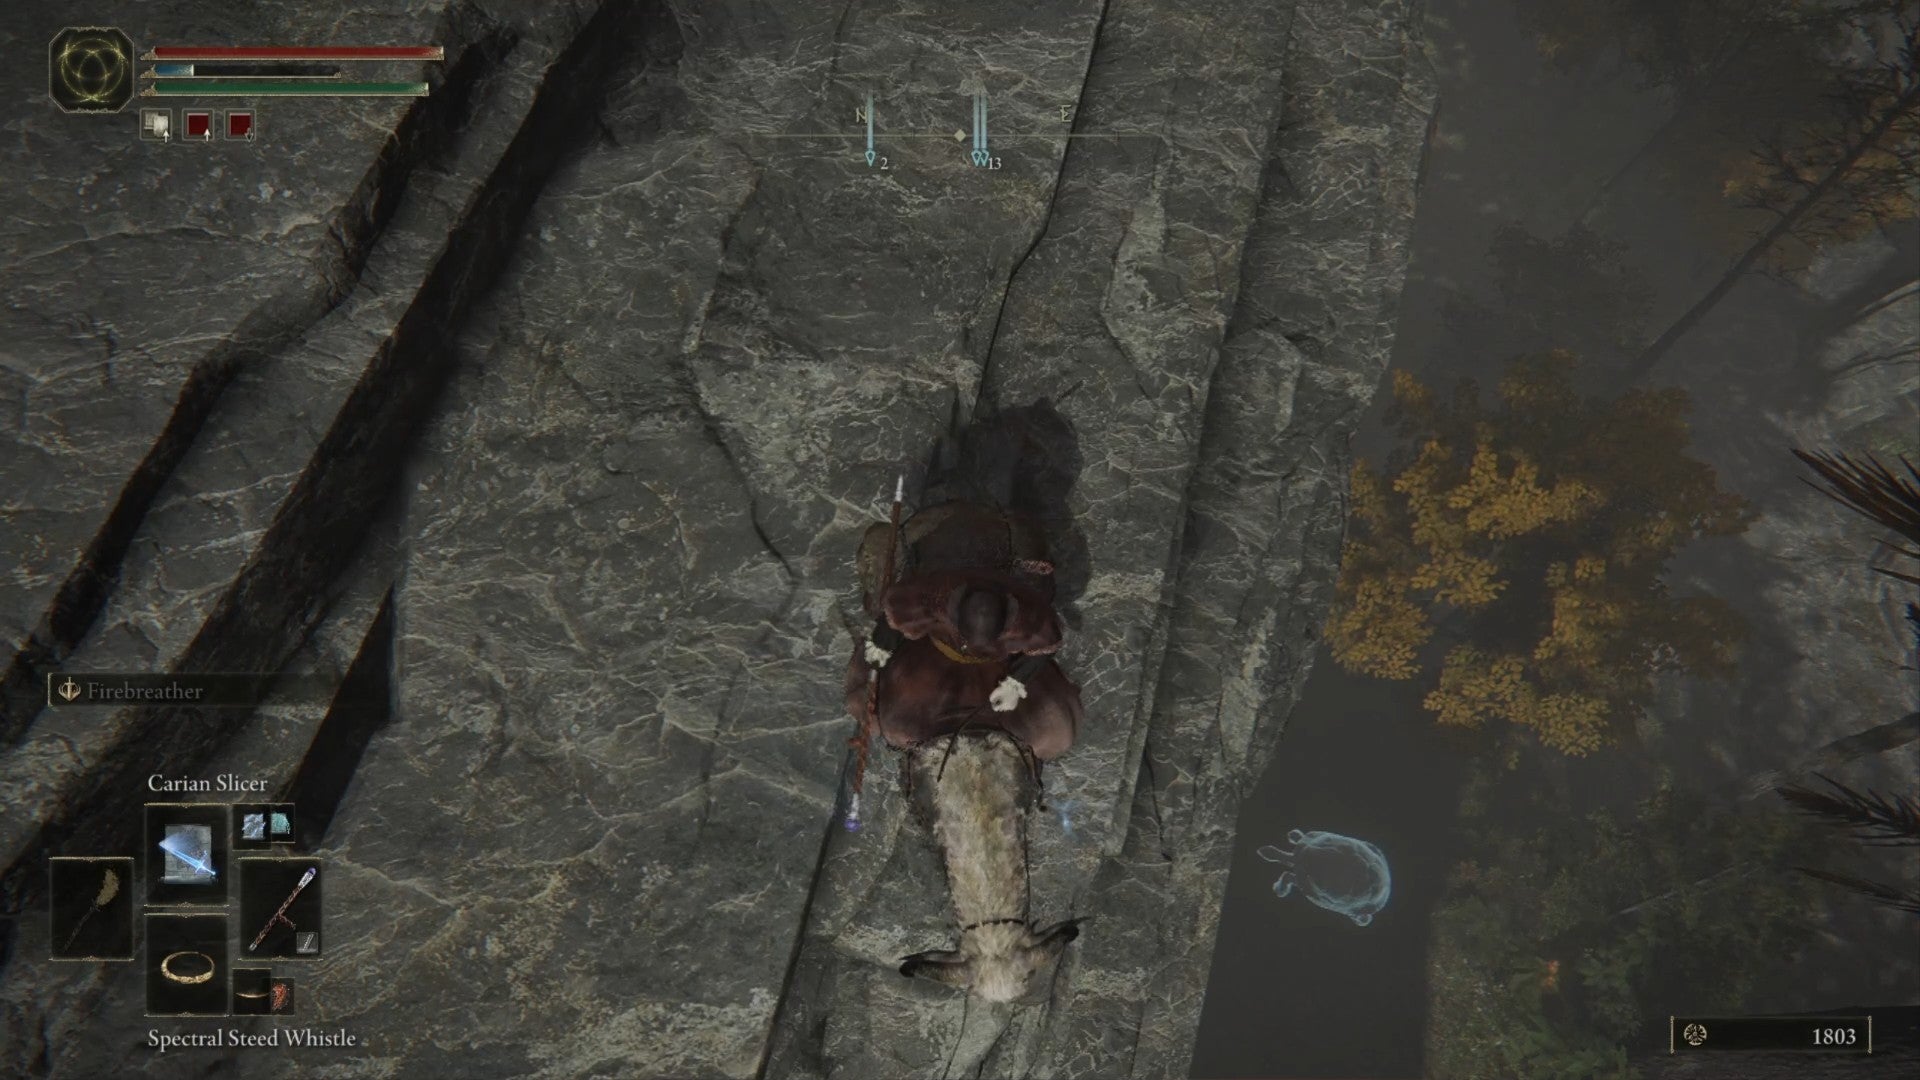 Elden Ring player riding a horse on top of a craggy rock, looking down at a ghost turtle on the ledge below